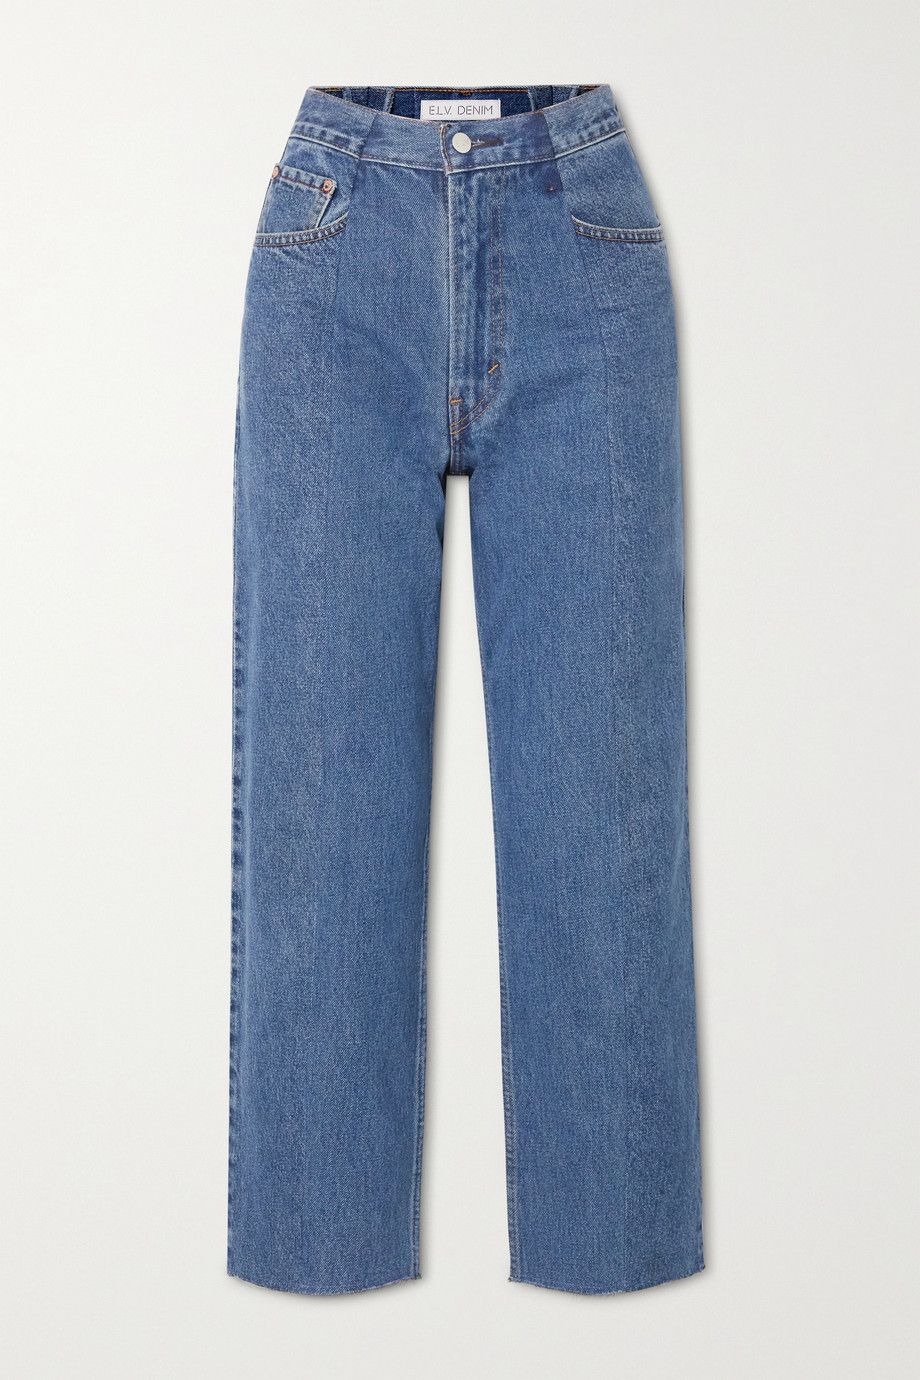 size 16 distressed jeans